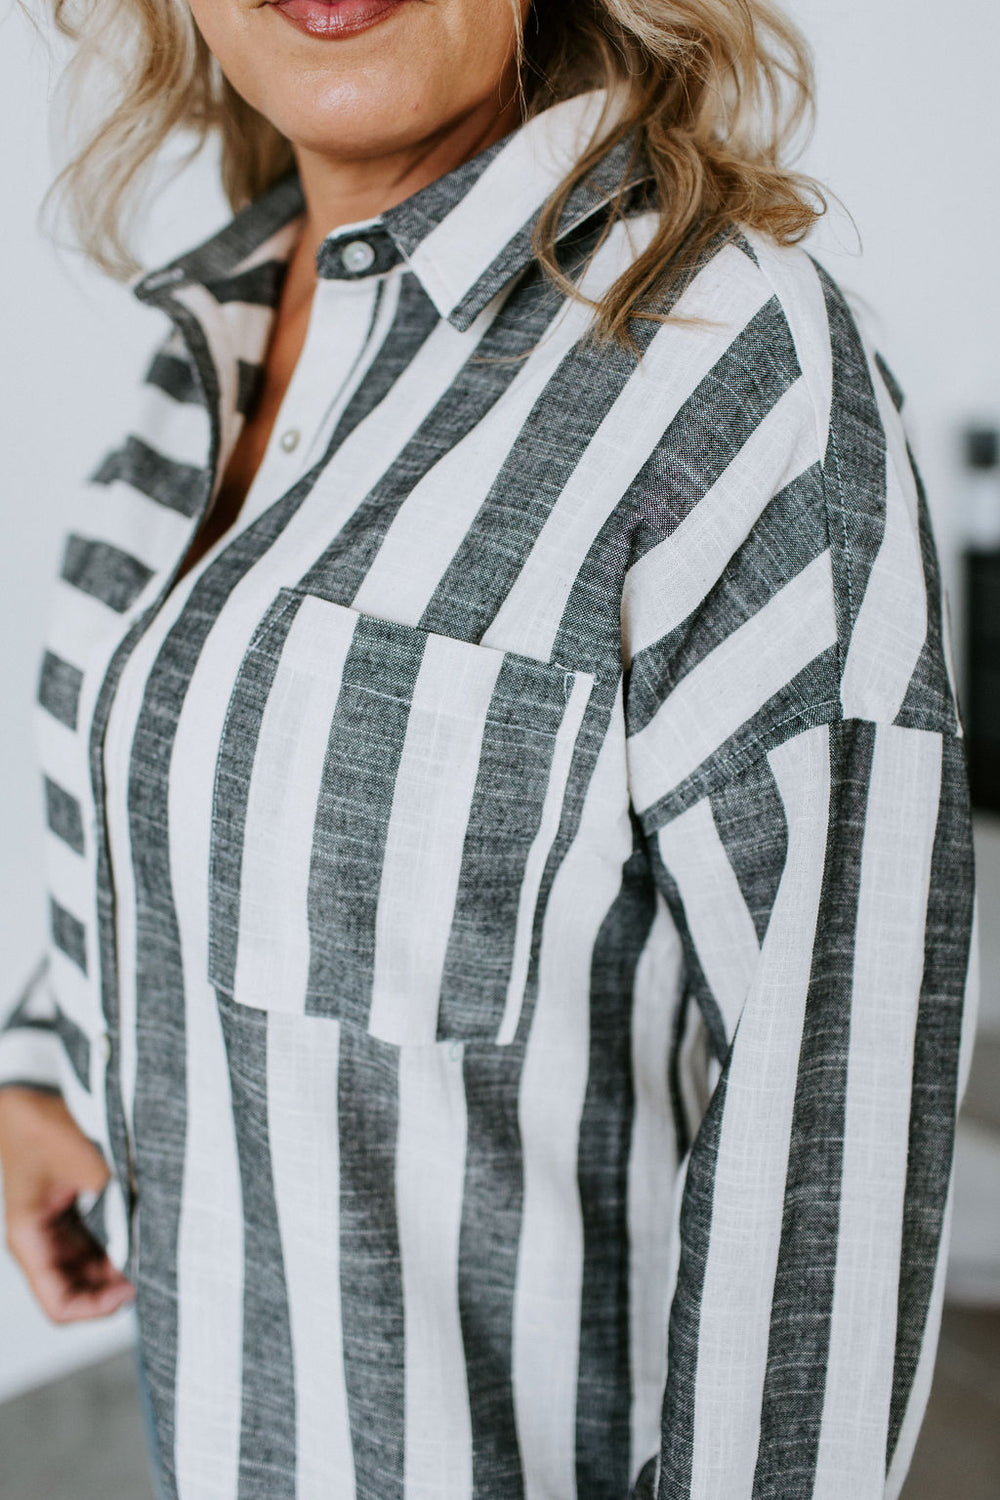 Just Your Stripe Top